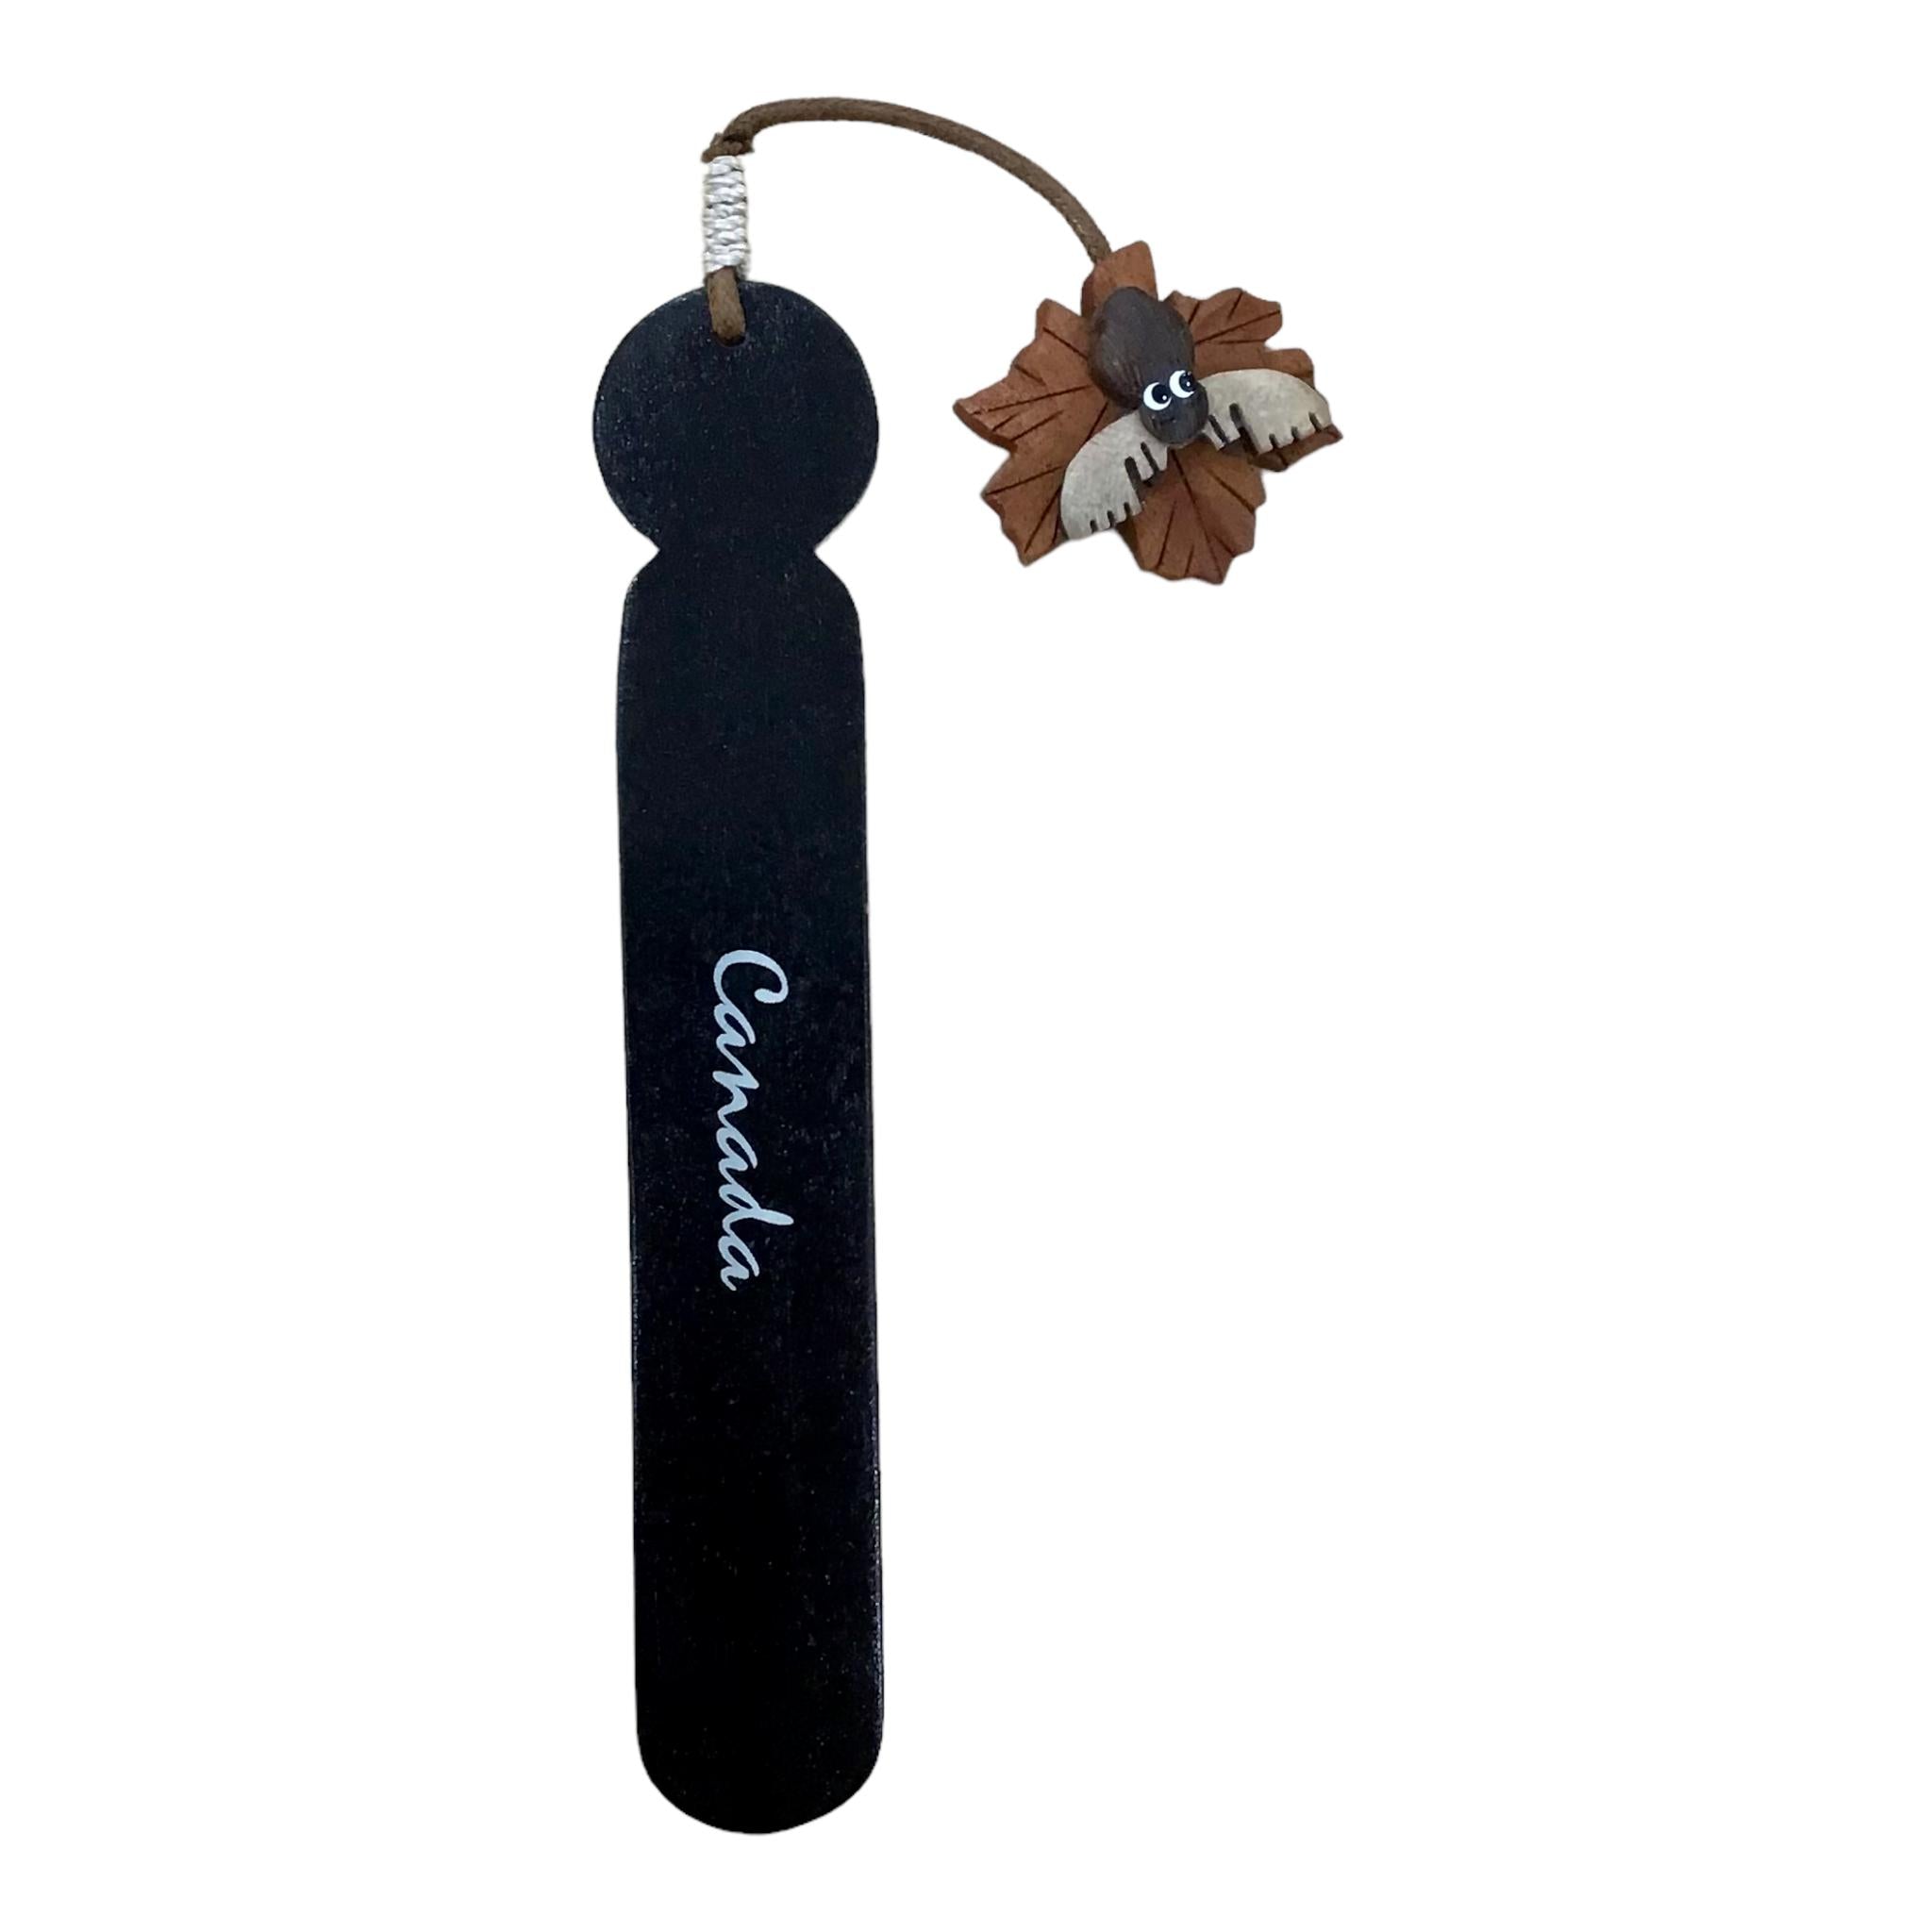 Canada Bookmark - Handmade Wooden Bookmark Moose on Maple Leaf - Marque au Page